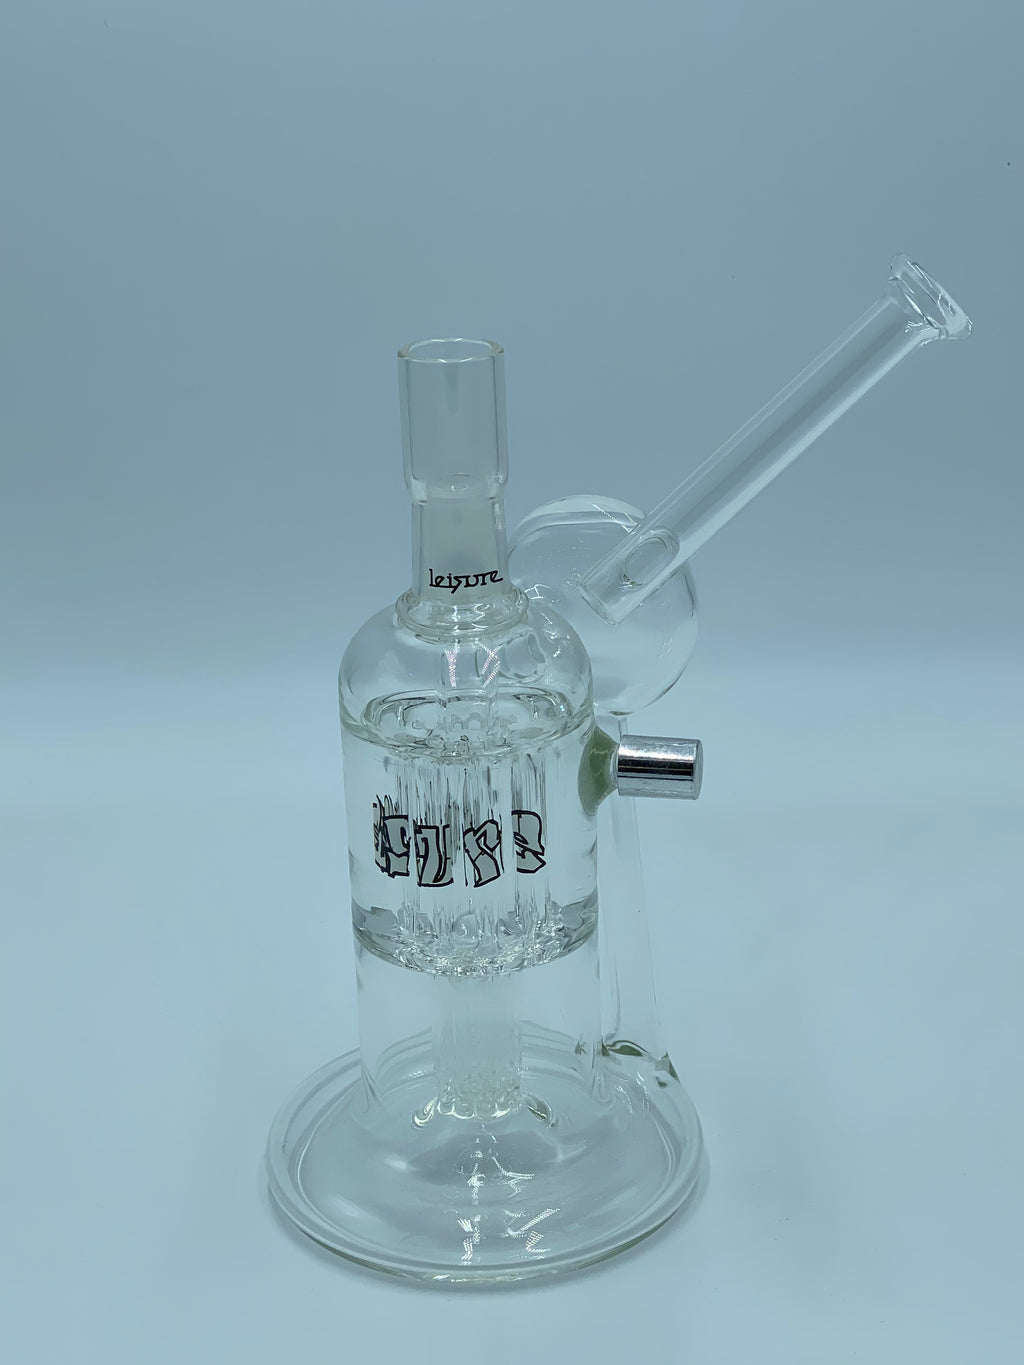 LEISURE GLASS FREEZABLE COIL RIG - Smoke Country - Land of the artistic glass blown bongs